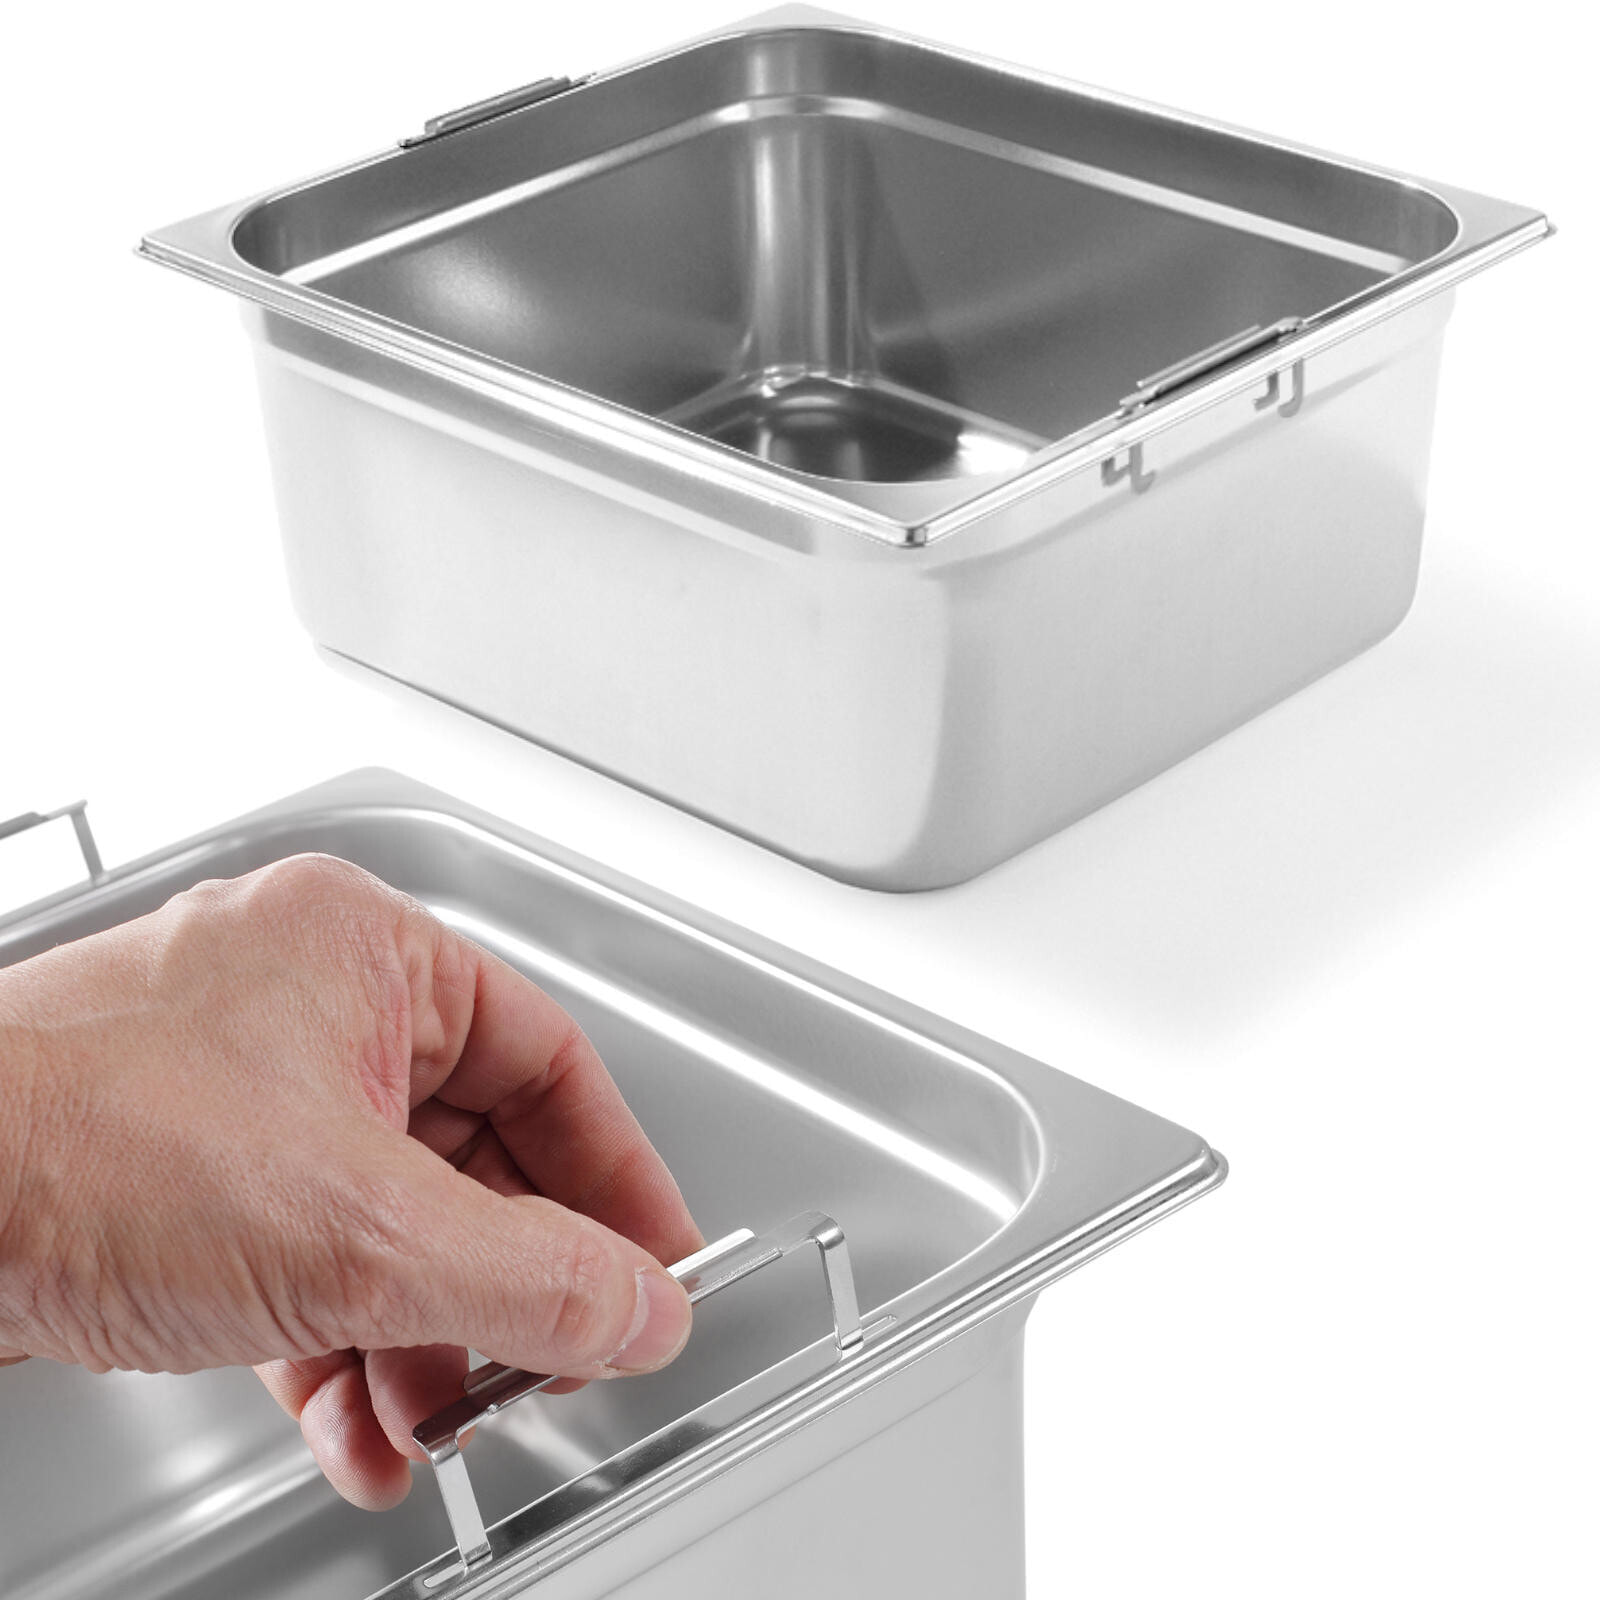 GN container with retractable handles, stainless steel GN2 / 3 354x325mm height 200mm - Hendi 803301